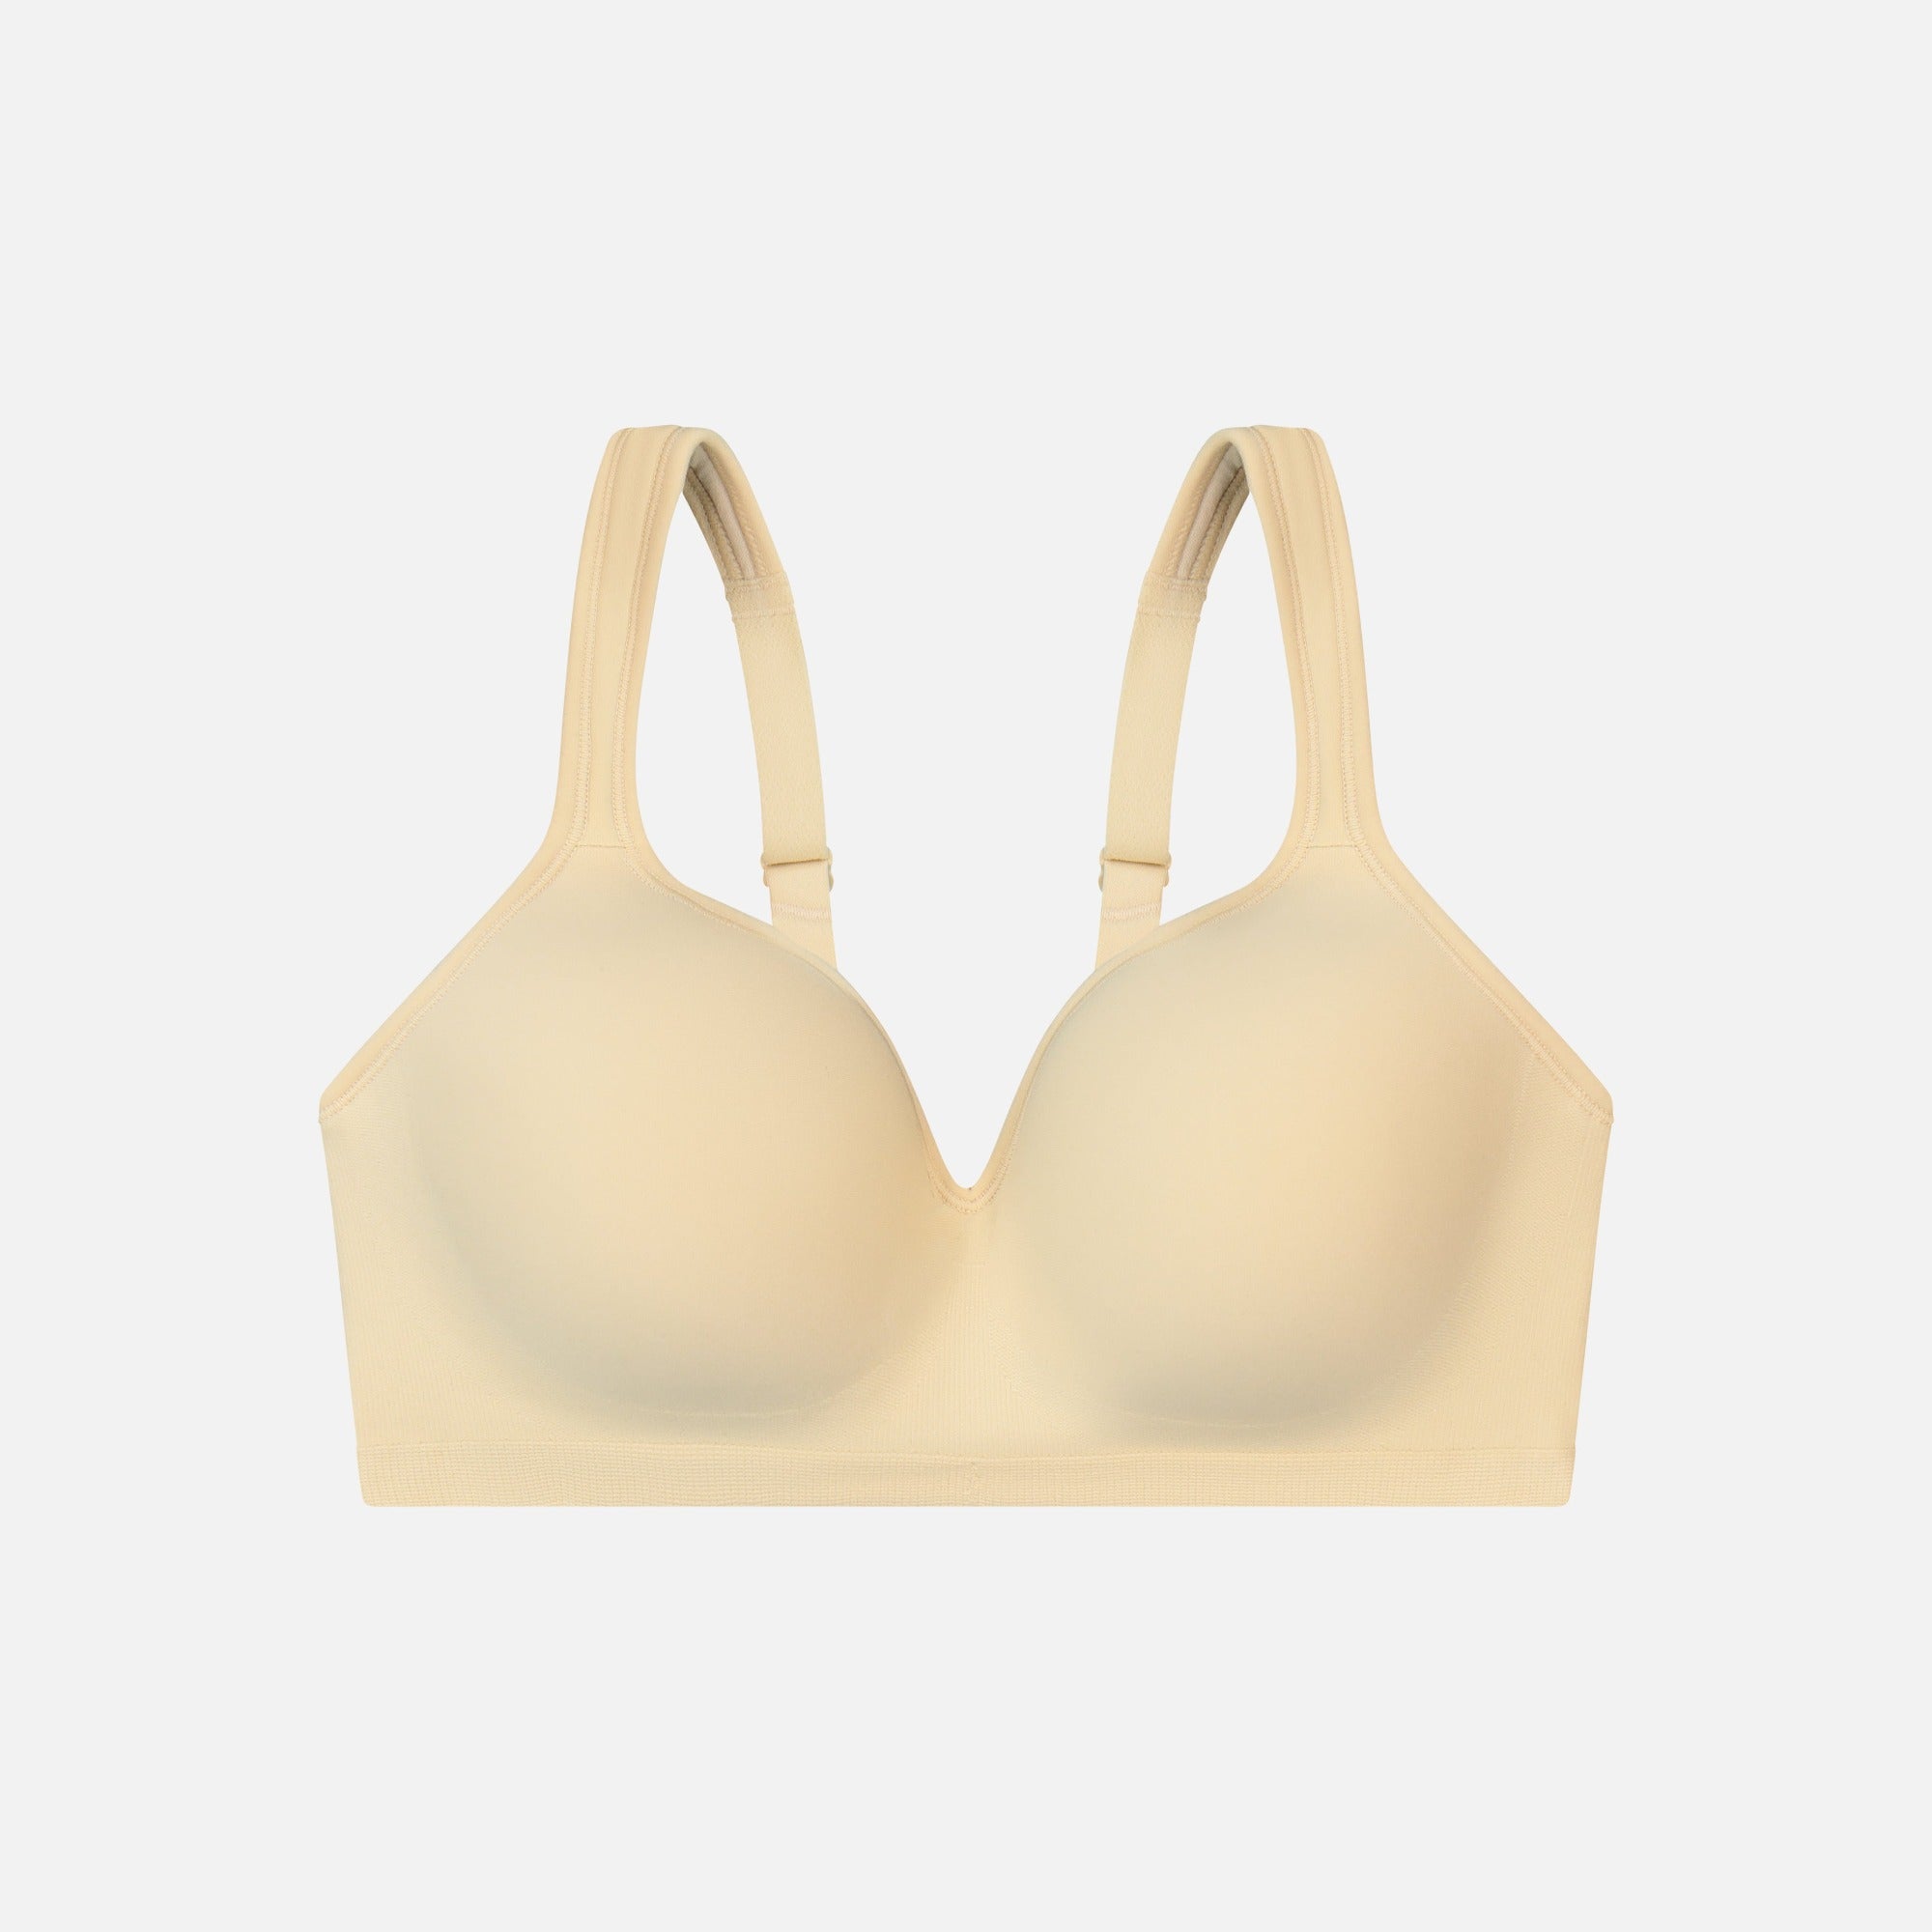 Eashery Under Outfit Bras for Women Self Expressions Strapless Bra